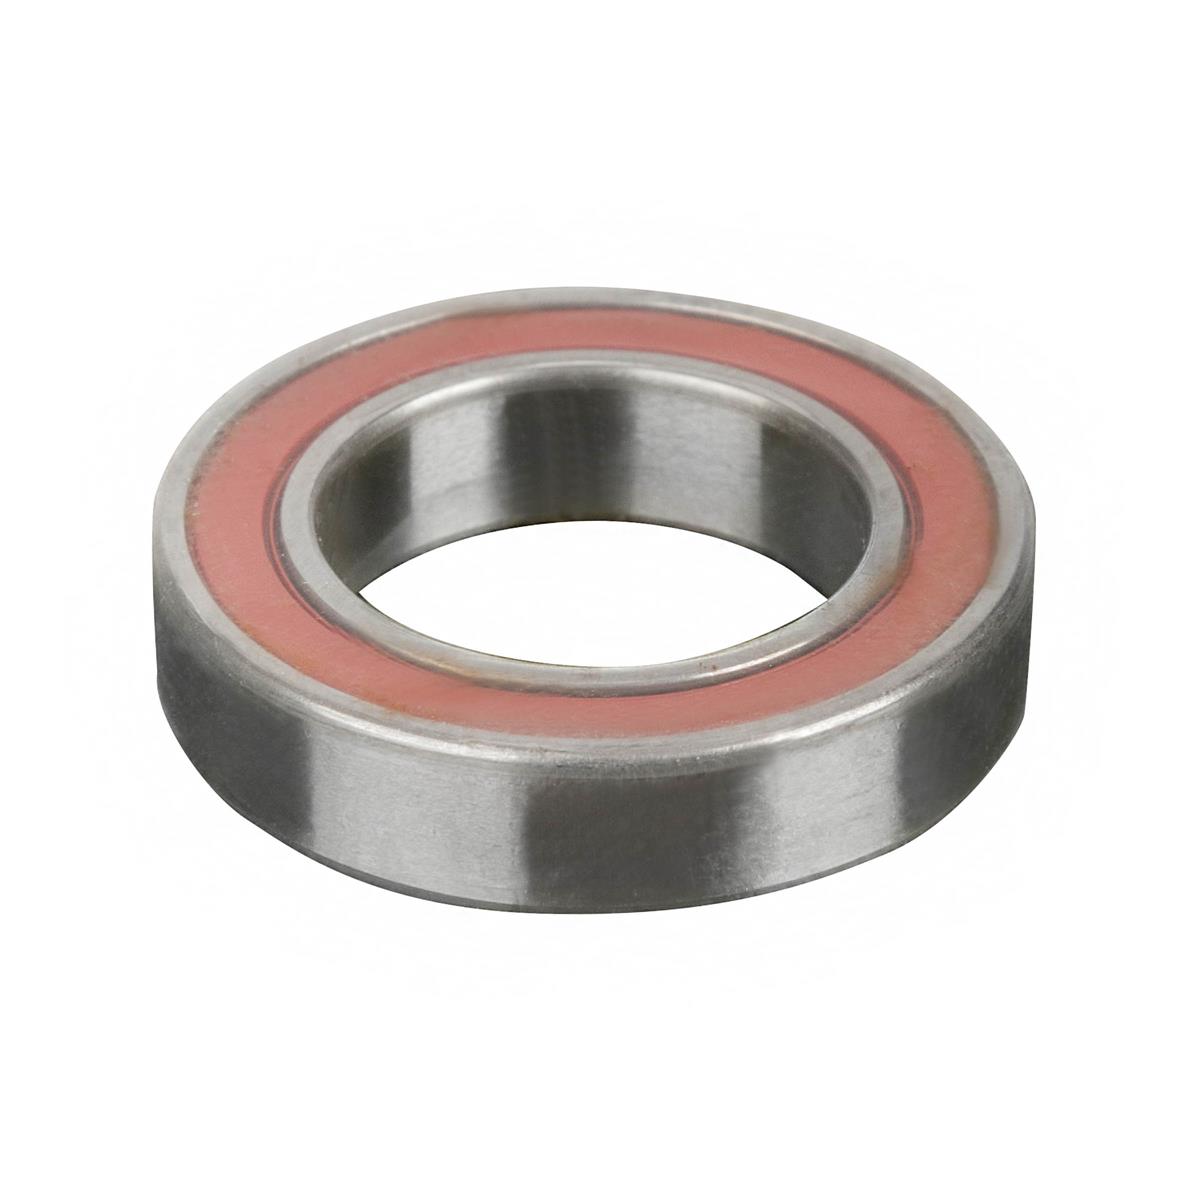 E*thirteen Replacement Hub Shell Bearing  Rear, TRS/LG1 Race drive side or TRS/LG1+ drive or non-drive side